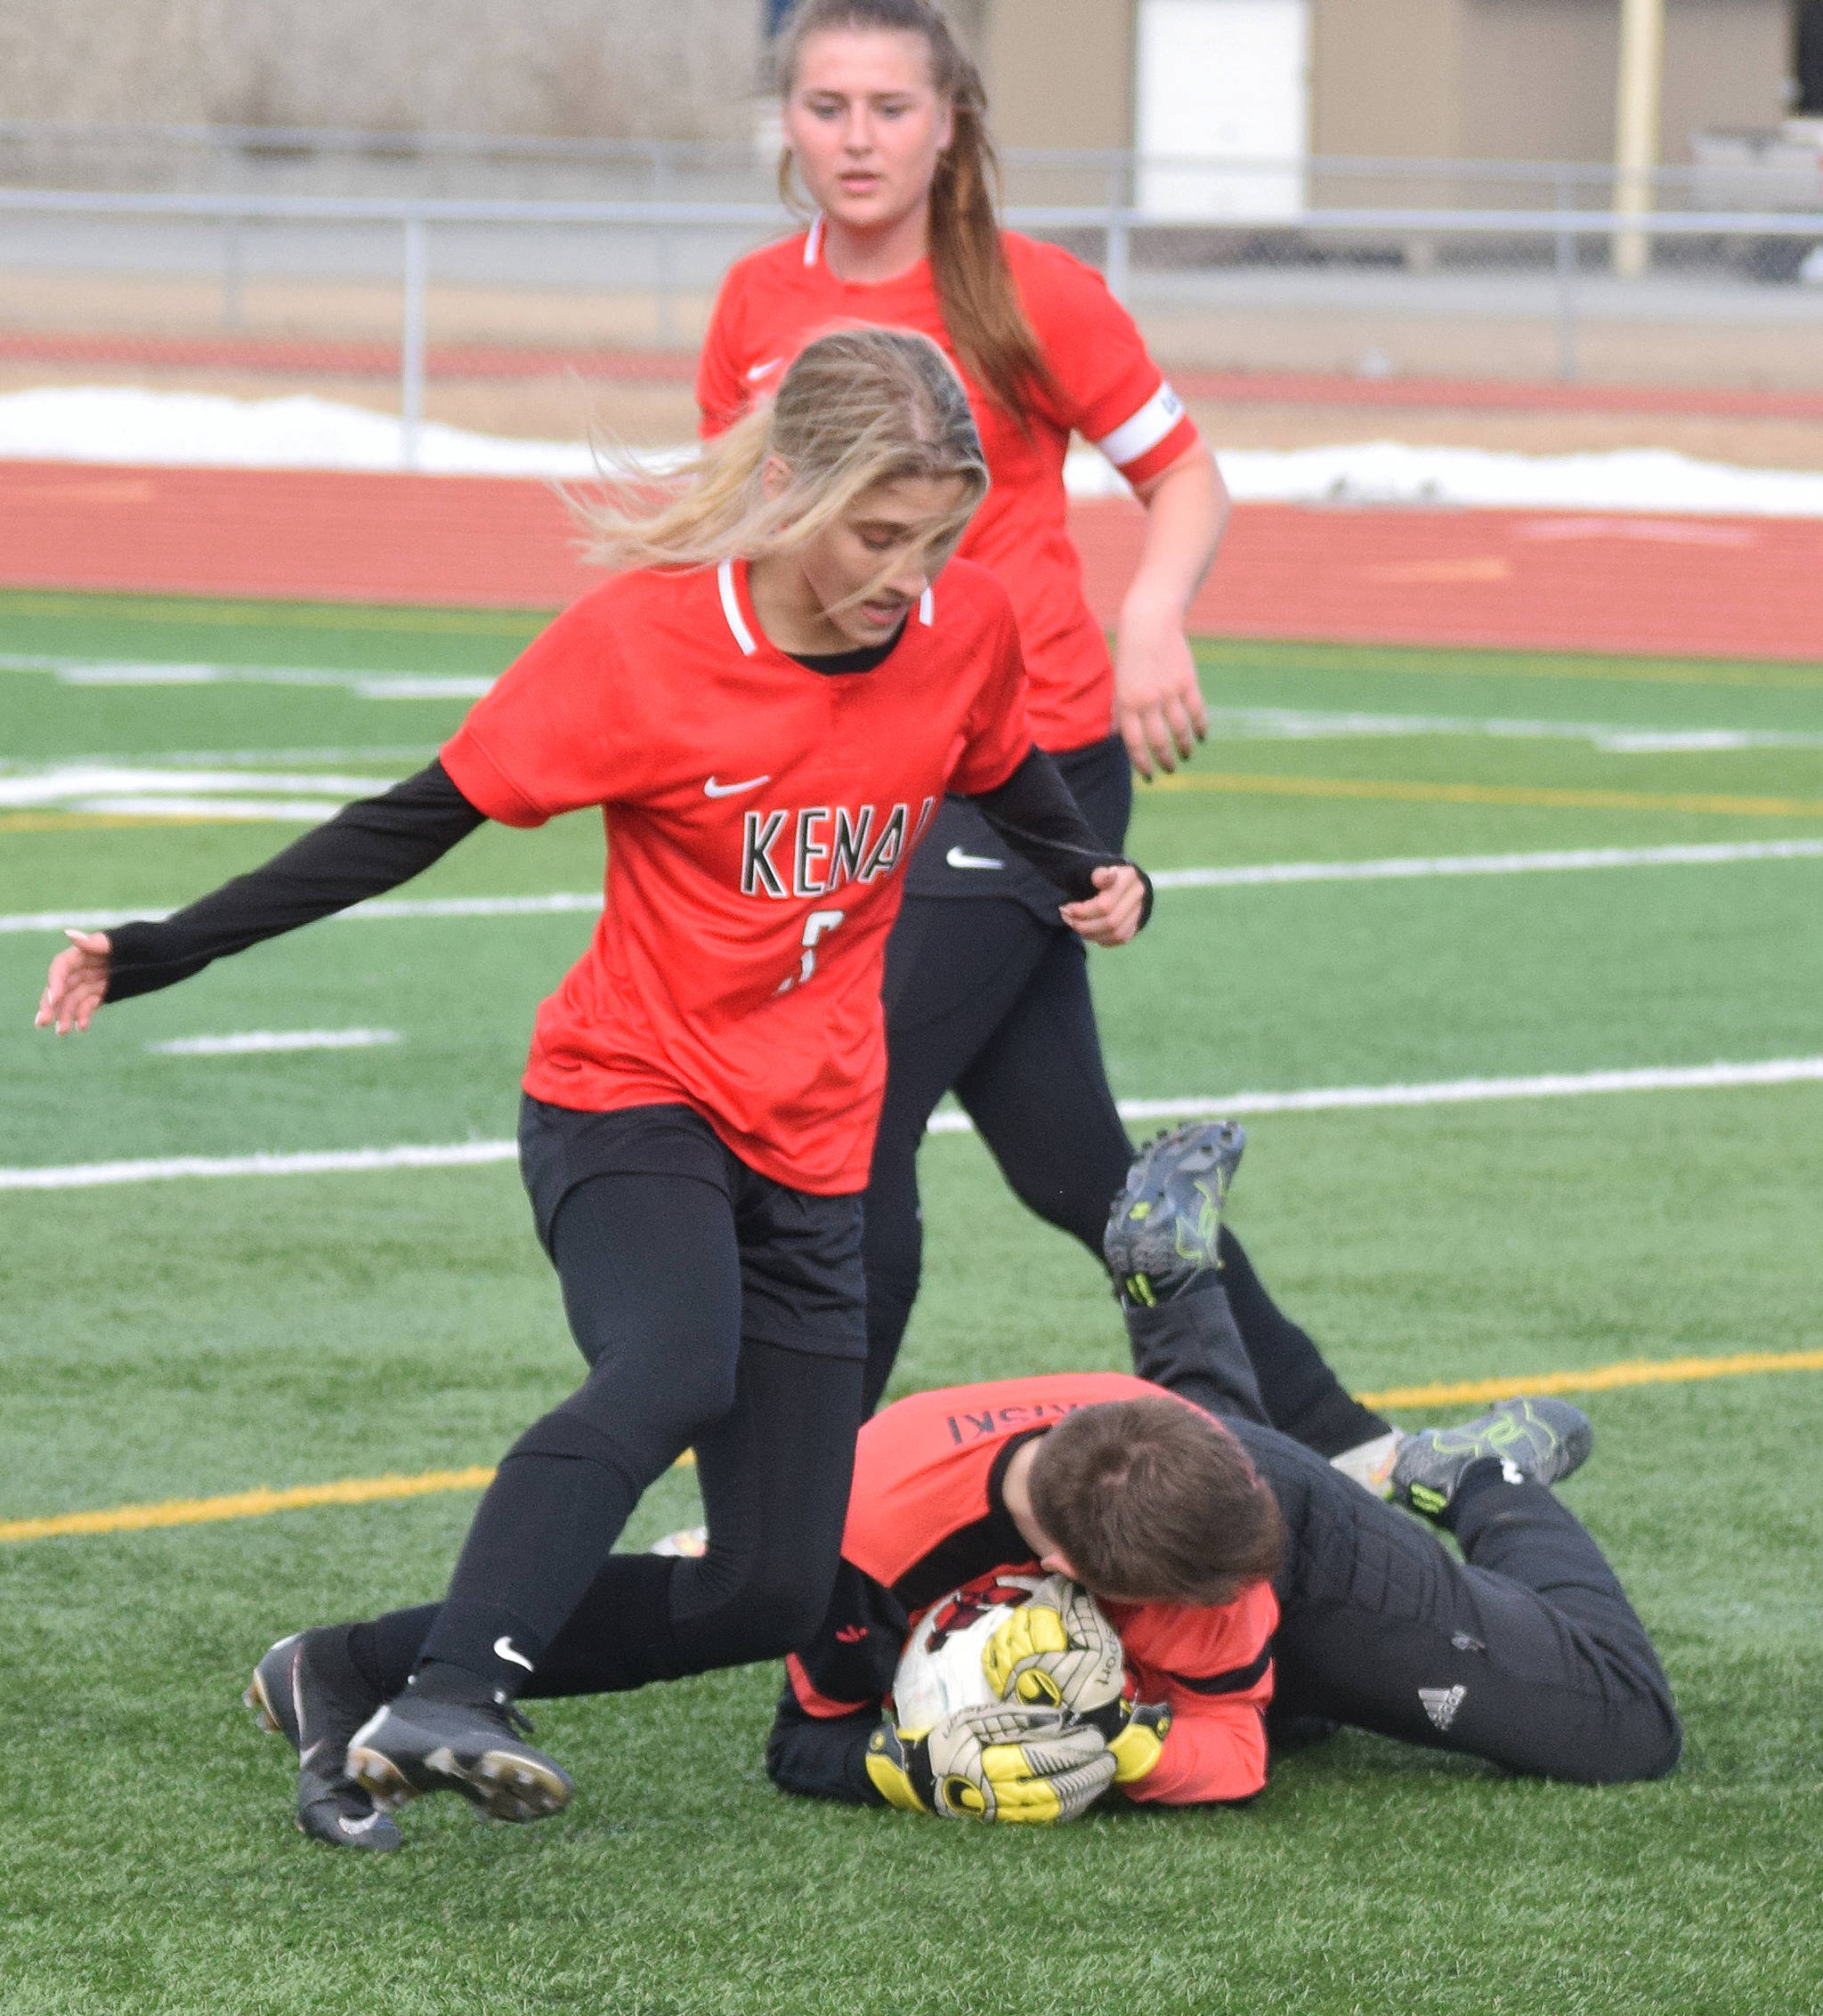 Nikiski goalkeeper Abby Bystedt (on ground) saves a shot taken by Kenai’s Karley Harden Thursday in a Peninsula Conference clash at Kenai Central High School. (Photo by Joey Klecka/Peninsula Clarion)